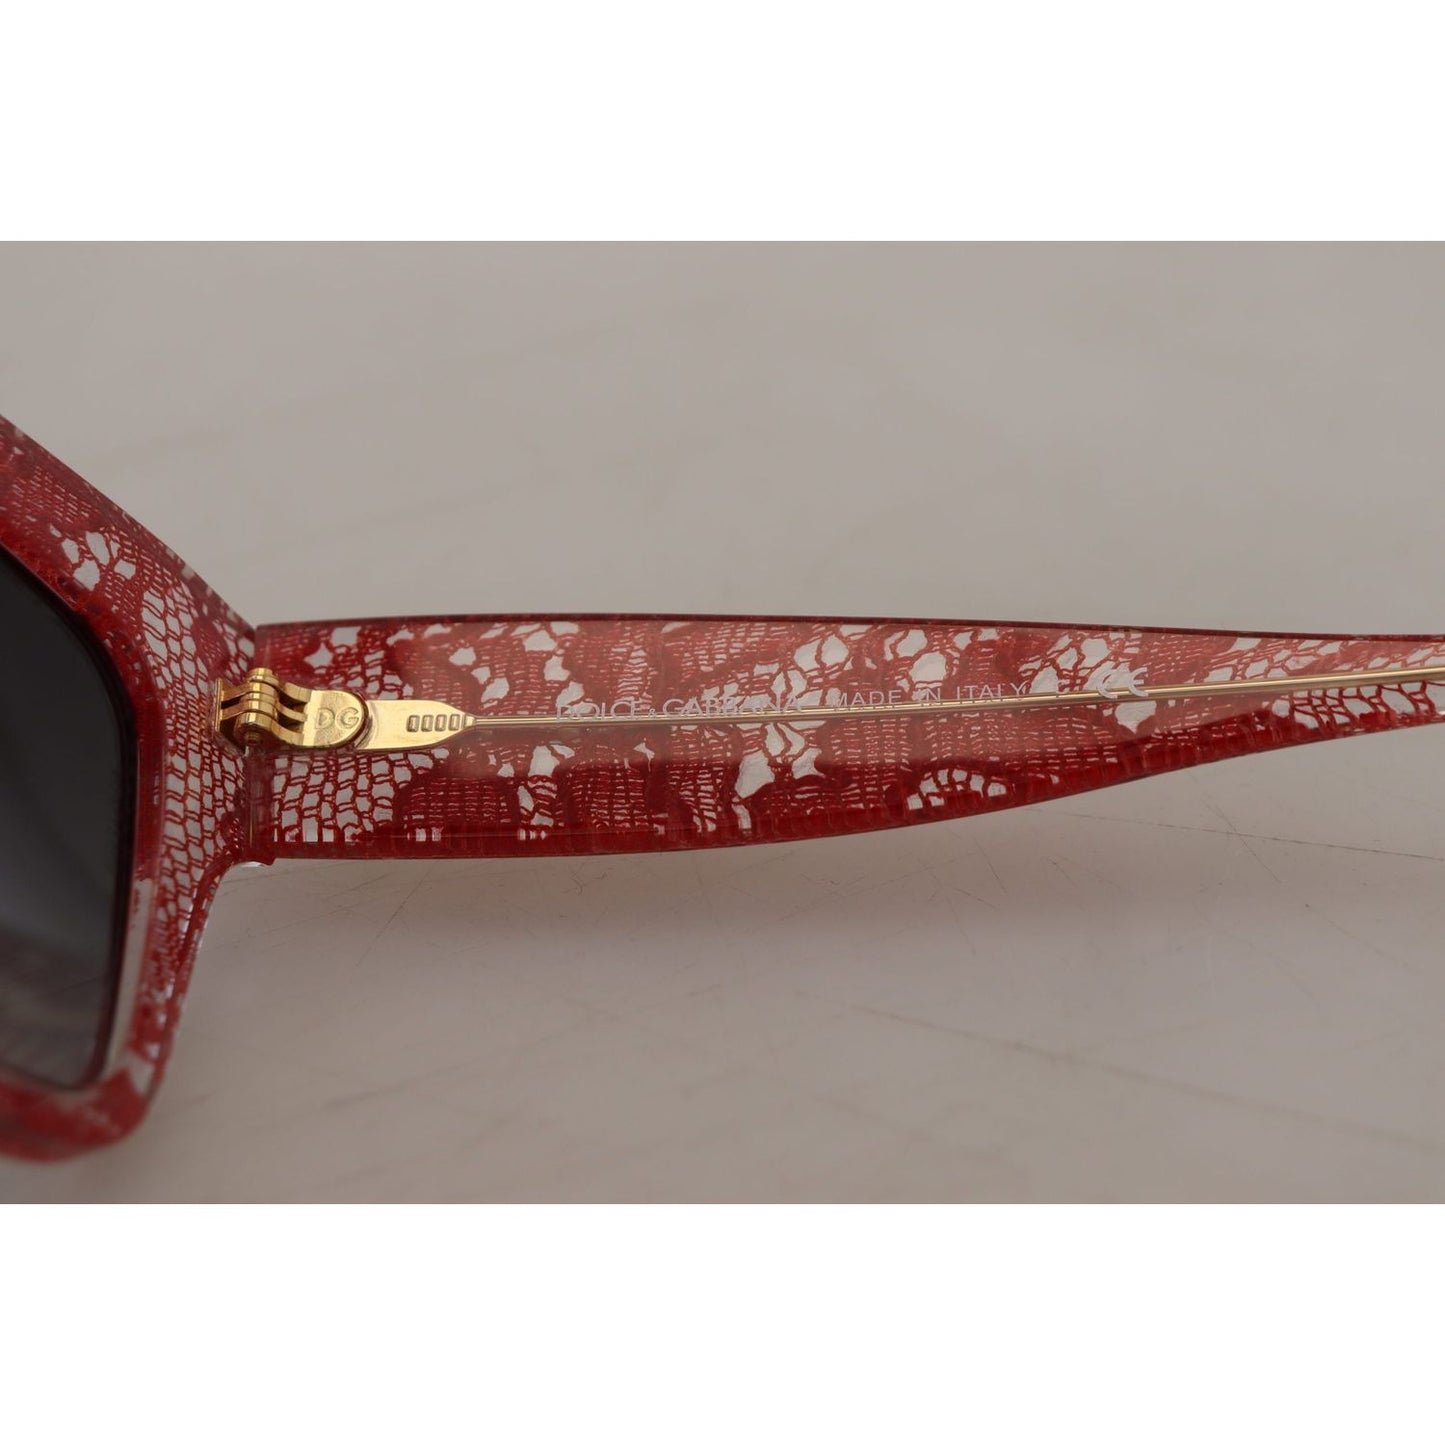 Dolce & Gabbana Elegant Lace-Infused Red Sunglasses red-lace-acetate-rectangle-shades-dg4231-sunglasses